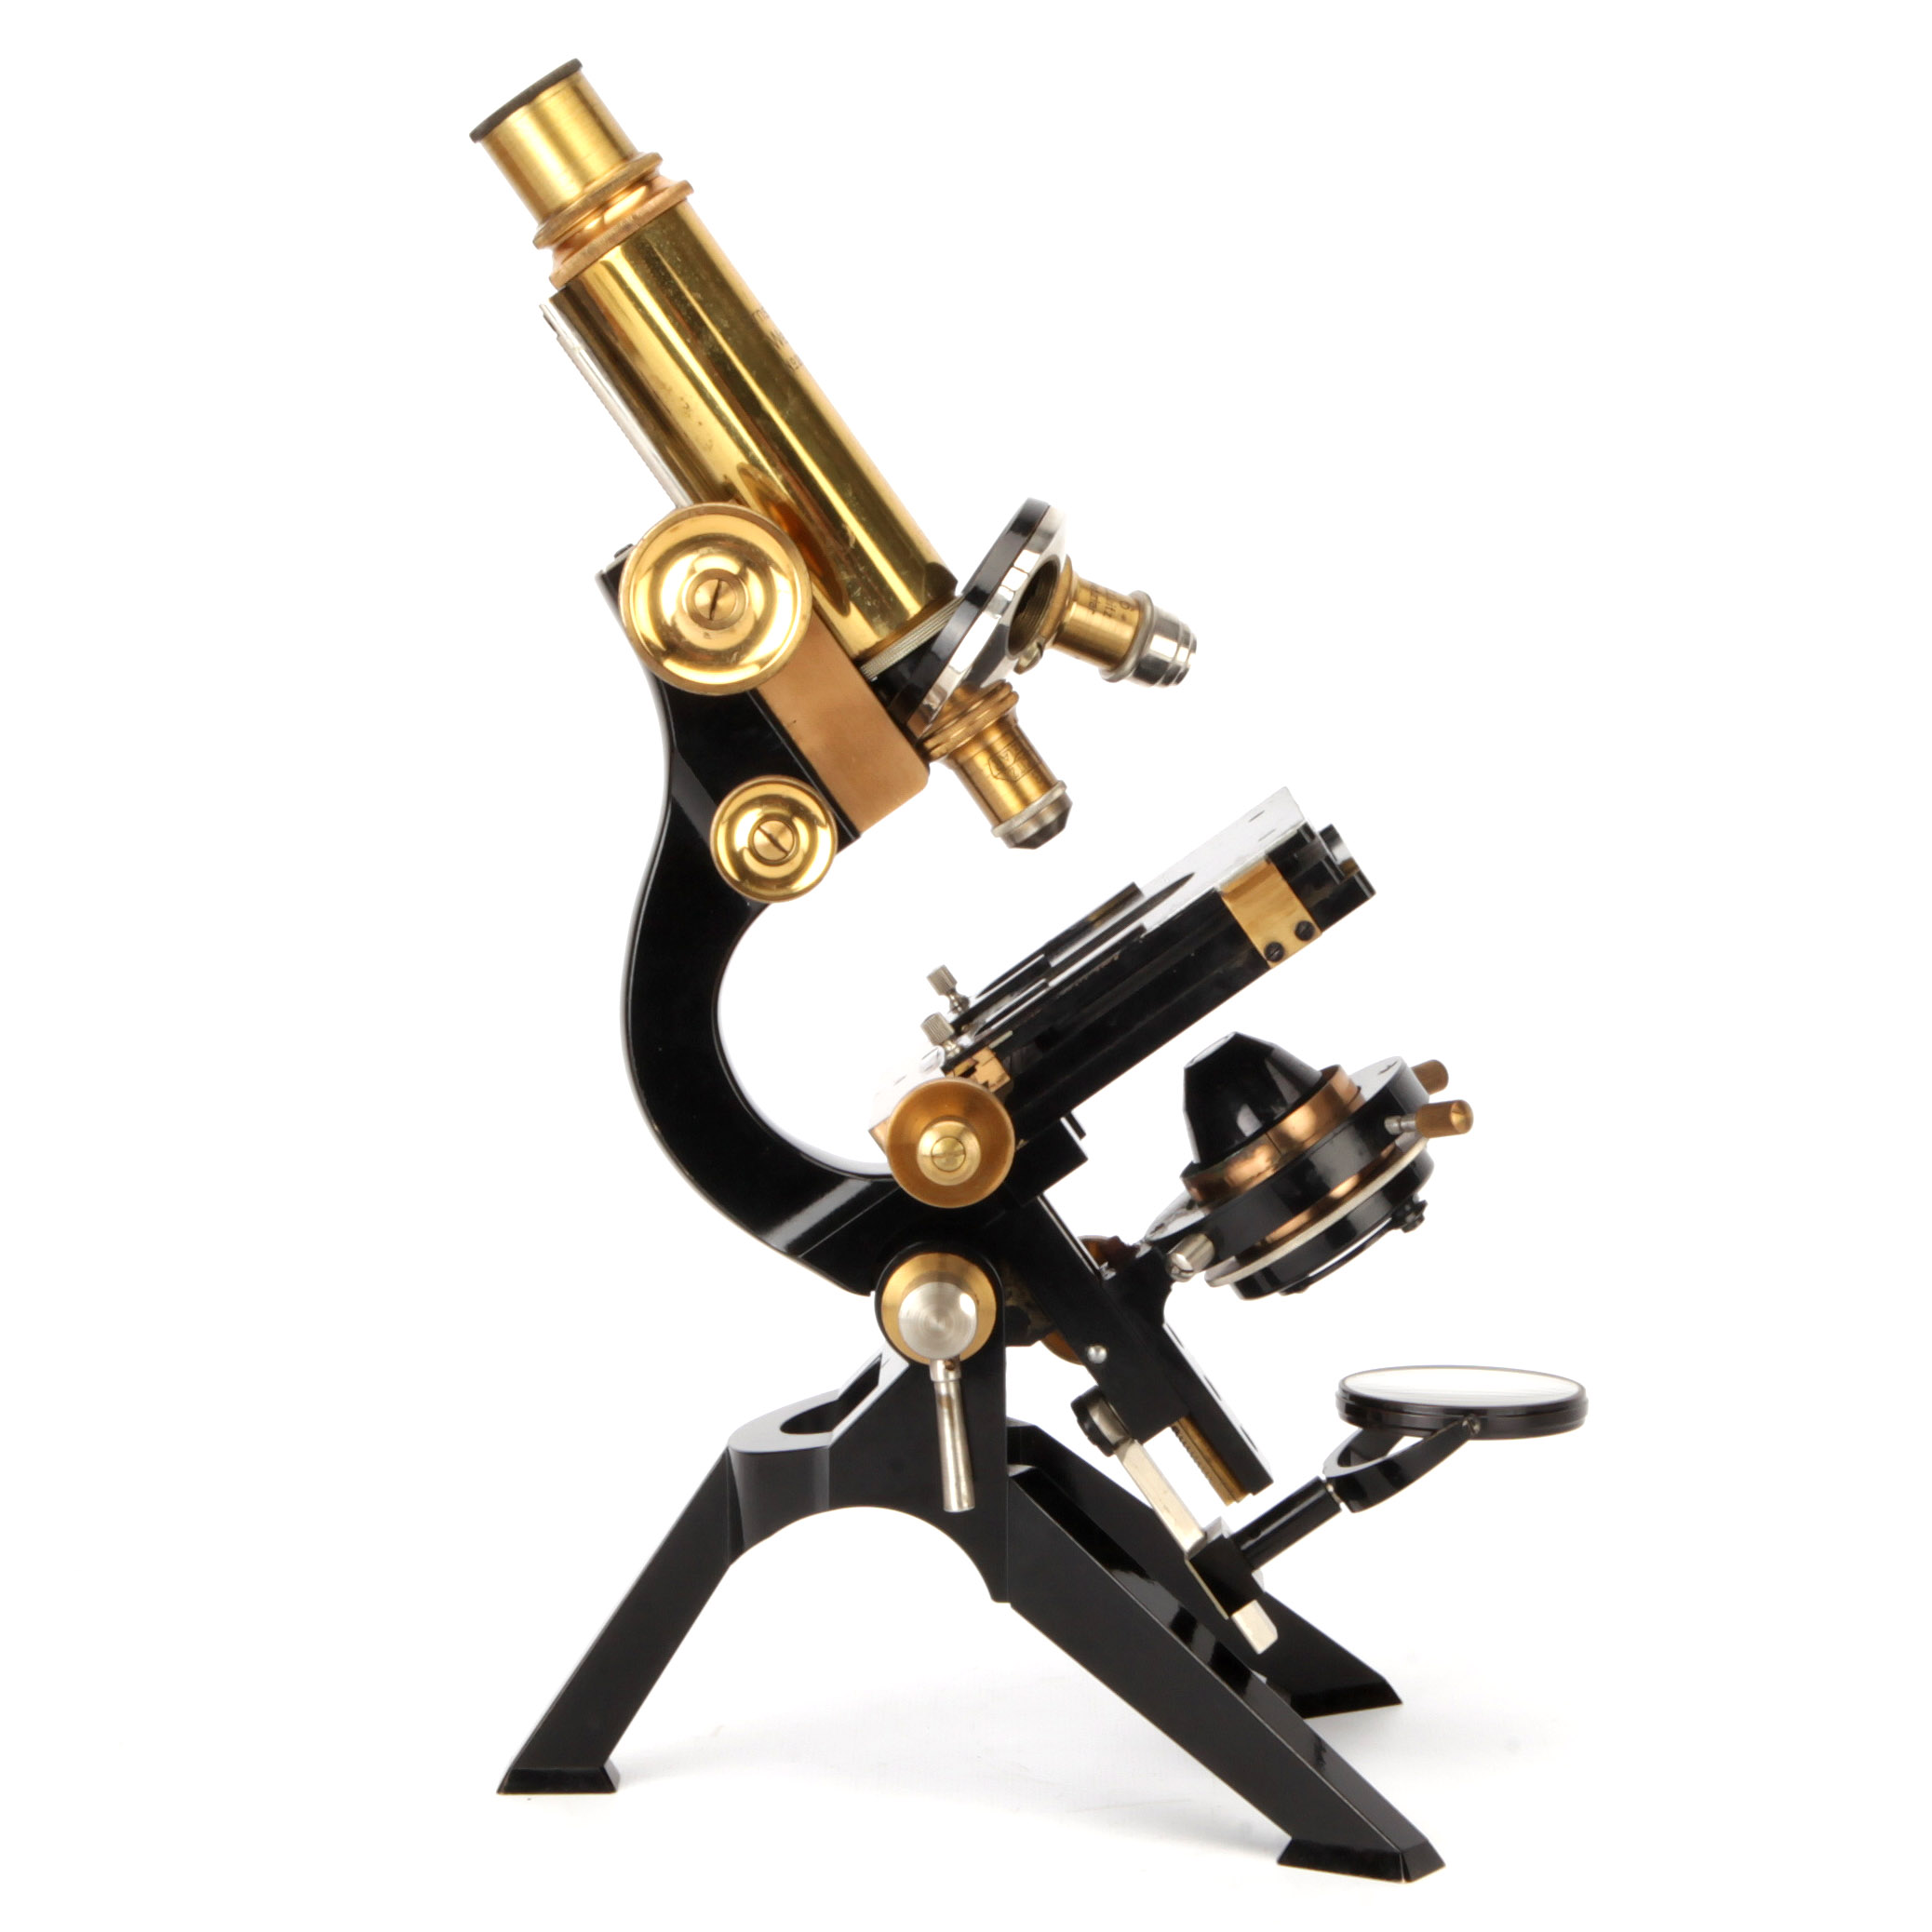 A Leitz 'Tripod' or 'English Stand' Microscope - Image 2 of 5